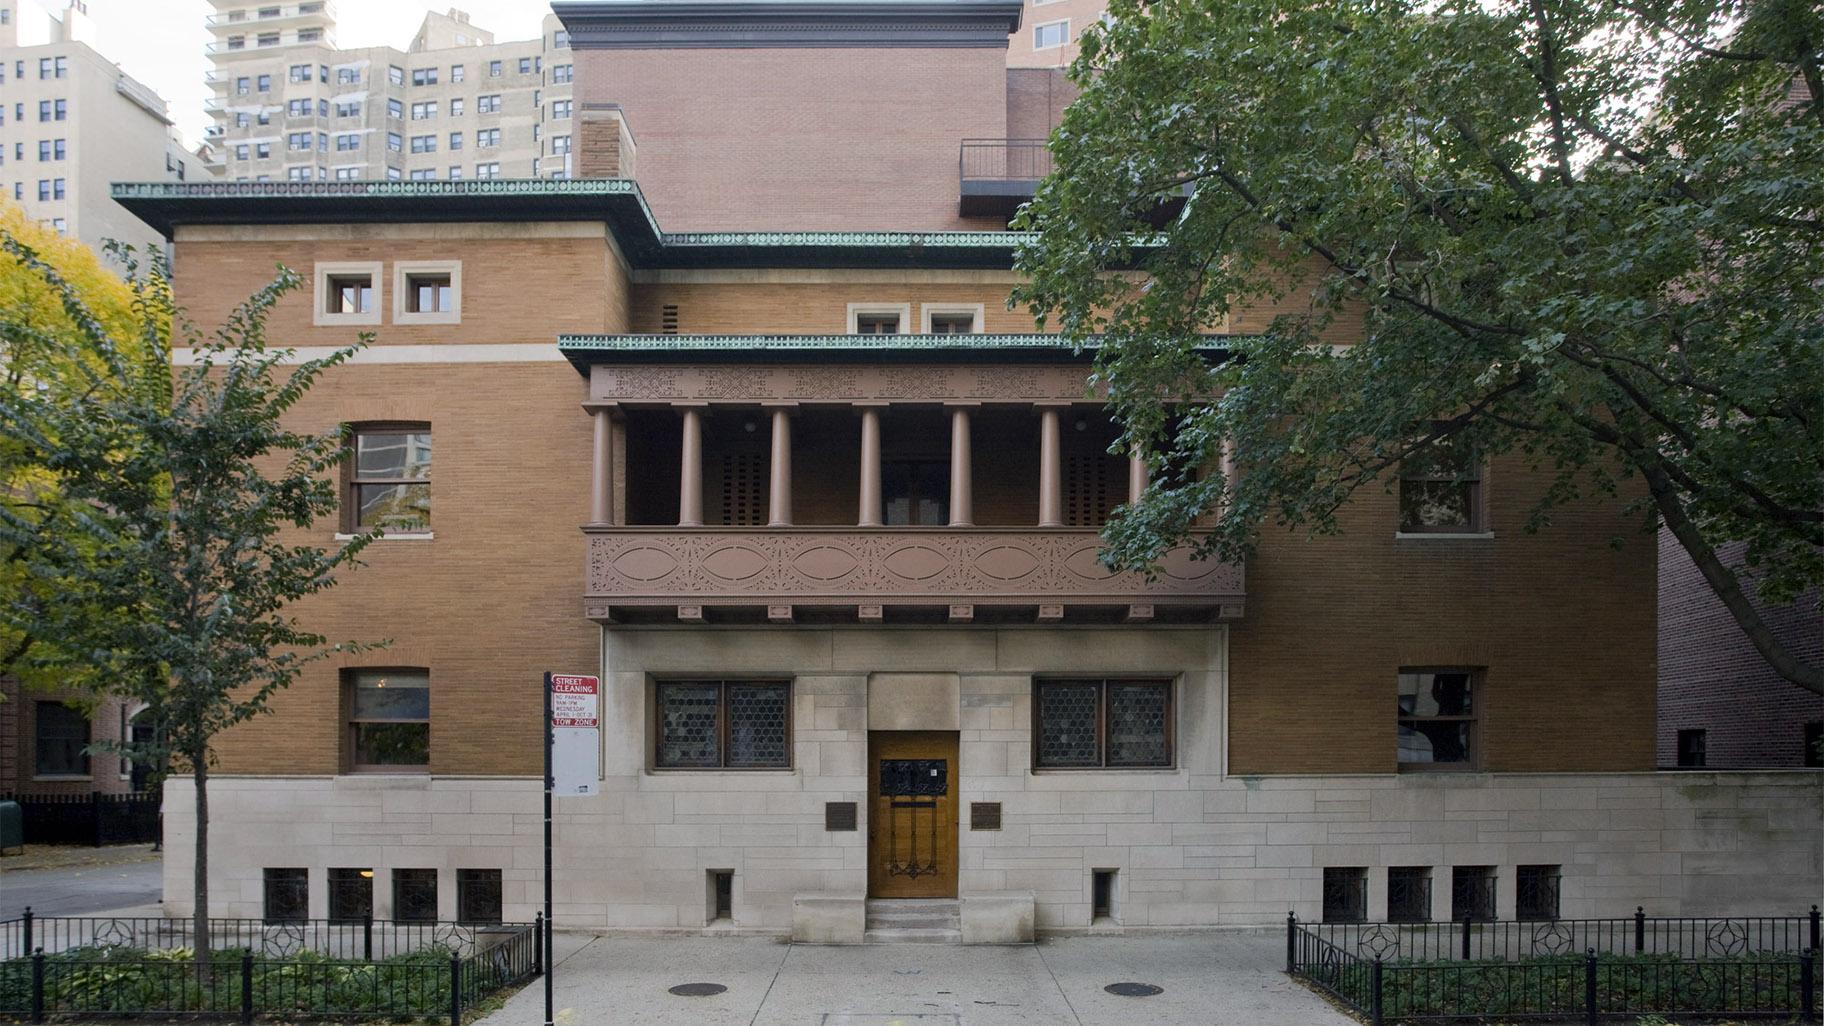 Wright and Sullivan did collaborate on several influential projects during their professional relationship, including the notable Charnley-Persky House which still stands in Chicago’s Gold Coast neighborhood. (Courtesy of  the Society of Architectural Historians)